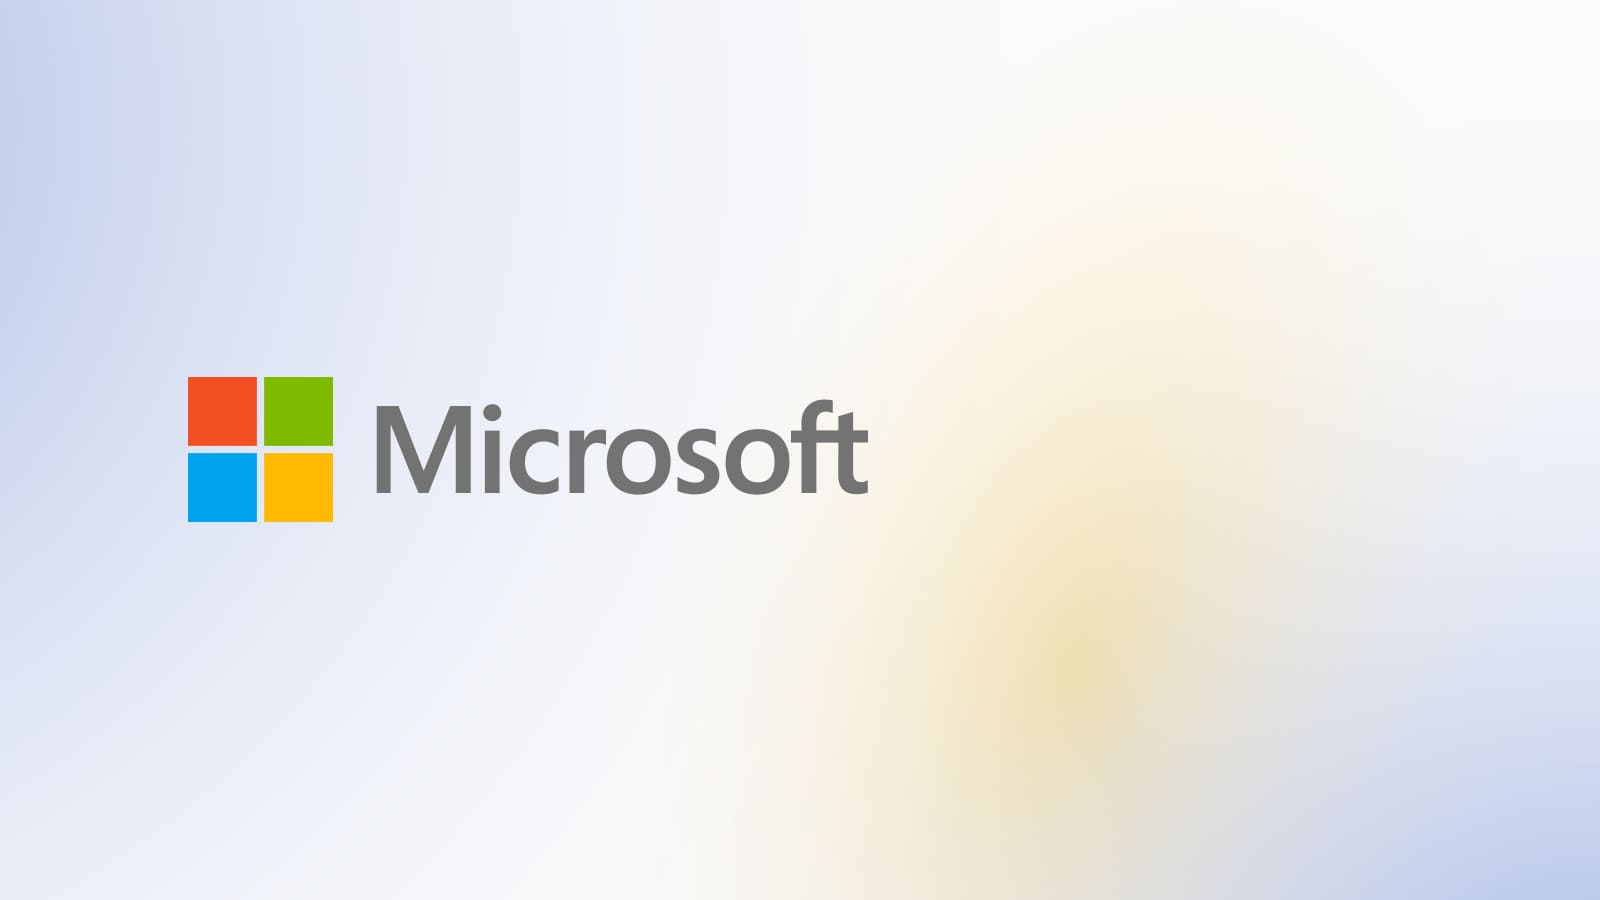 Microsoft, a global tech giant, was one of the first to accept Bitcoin payments in 2014.